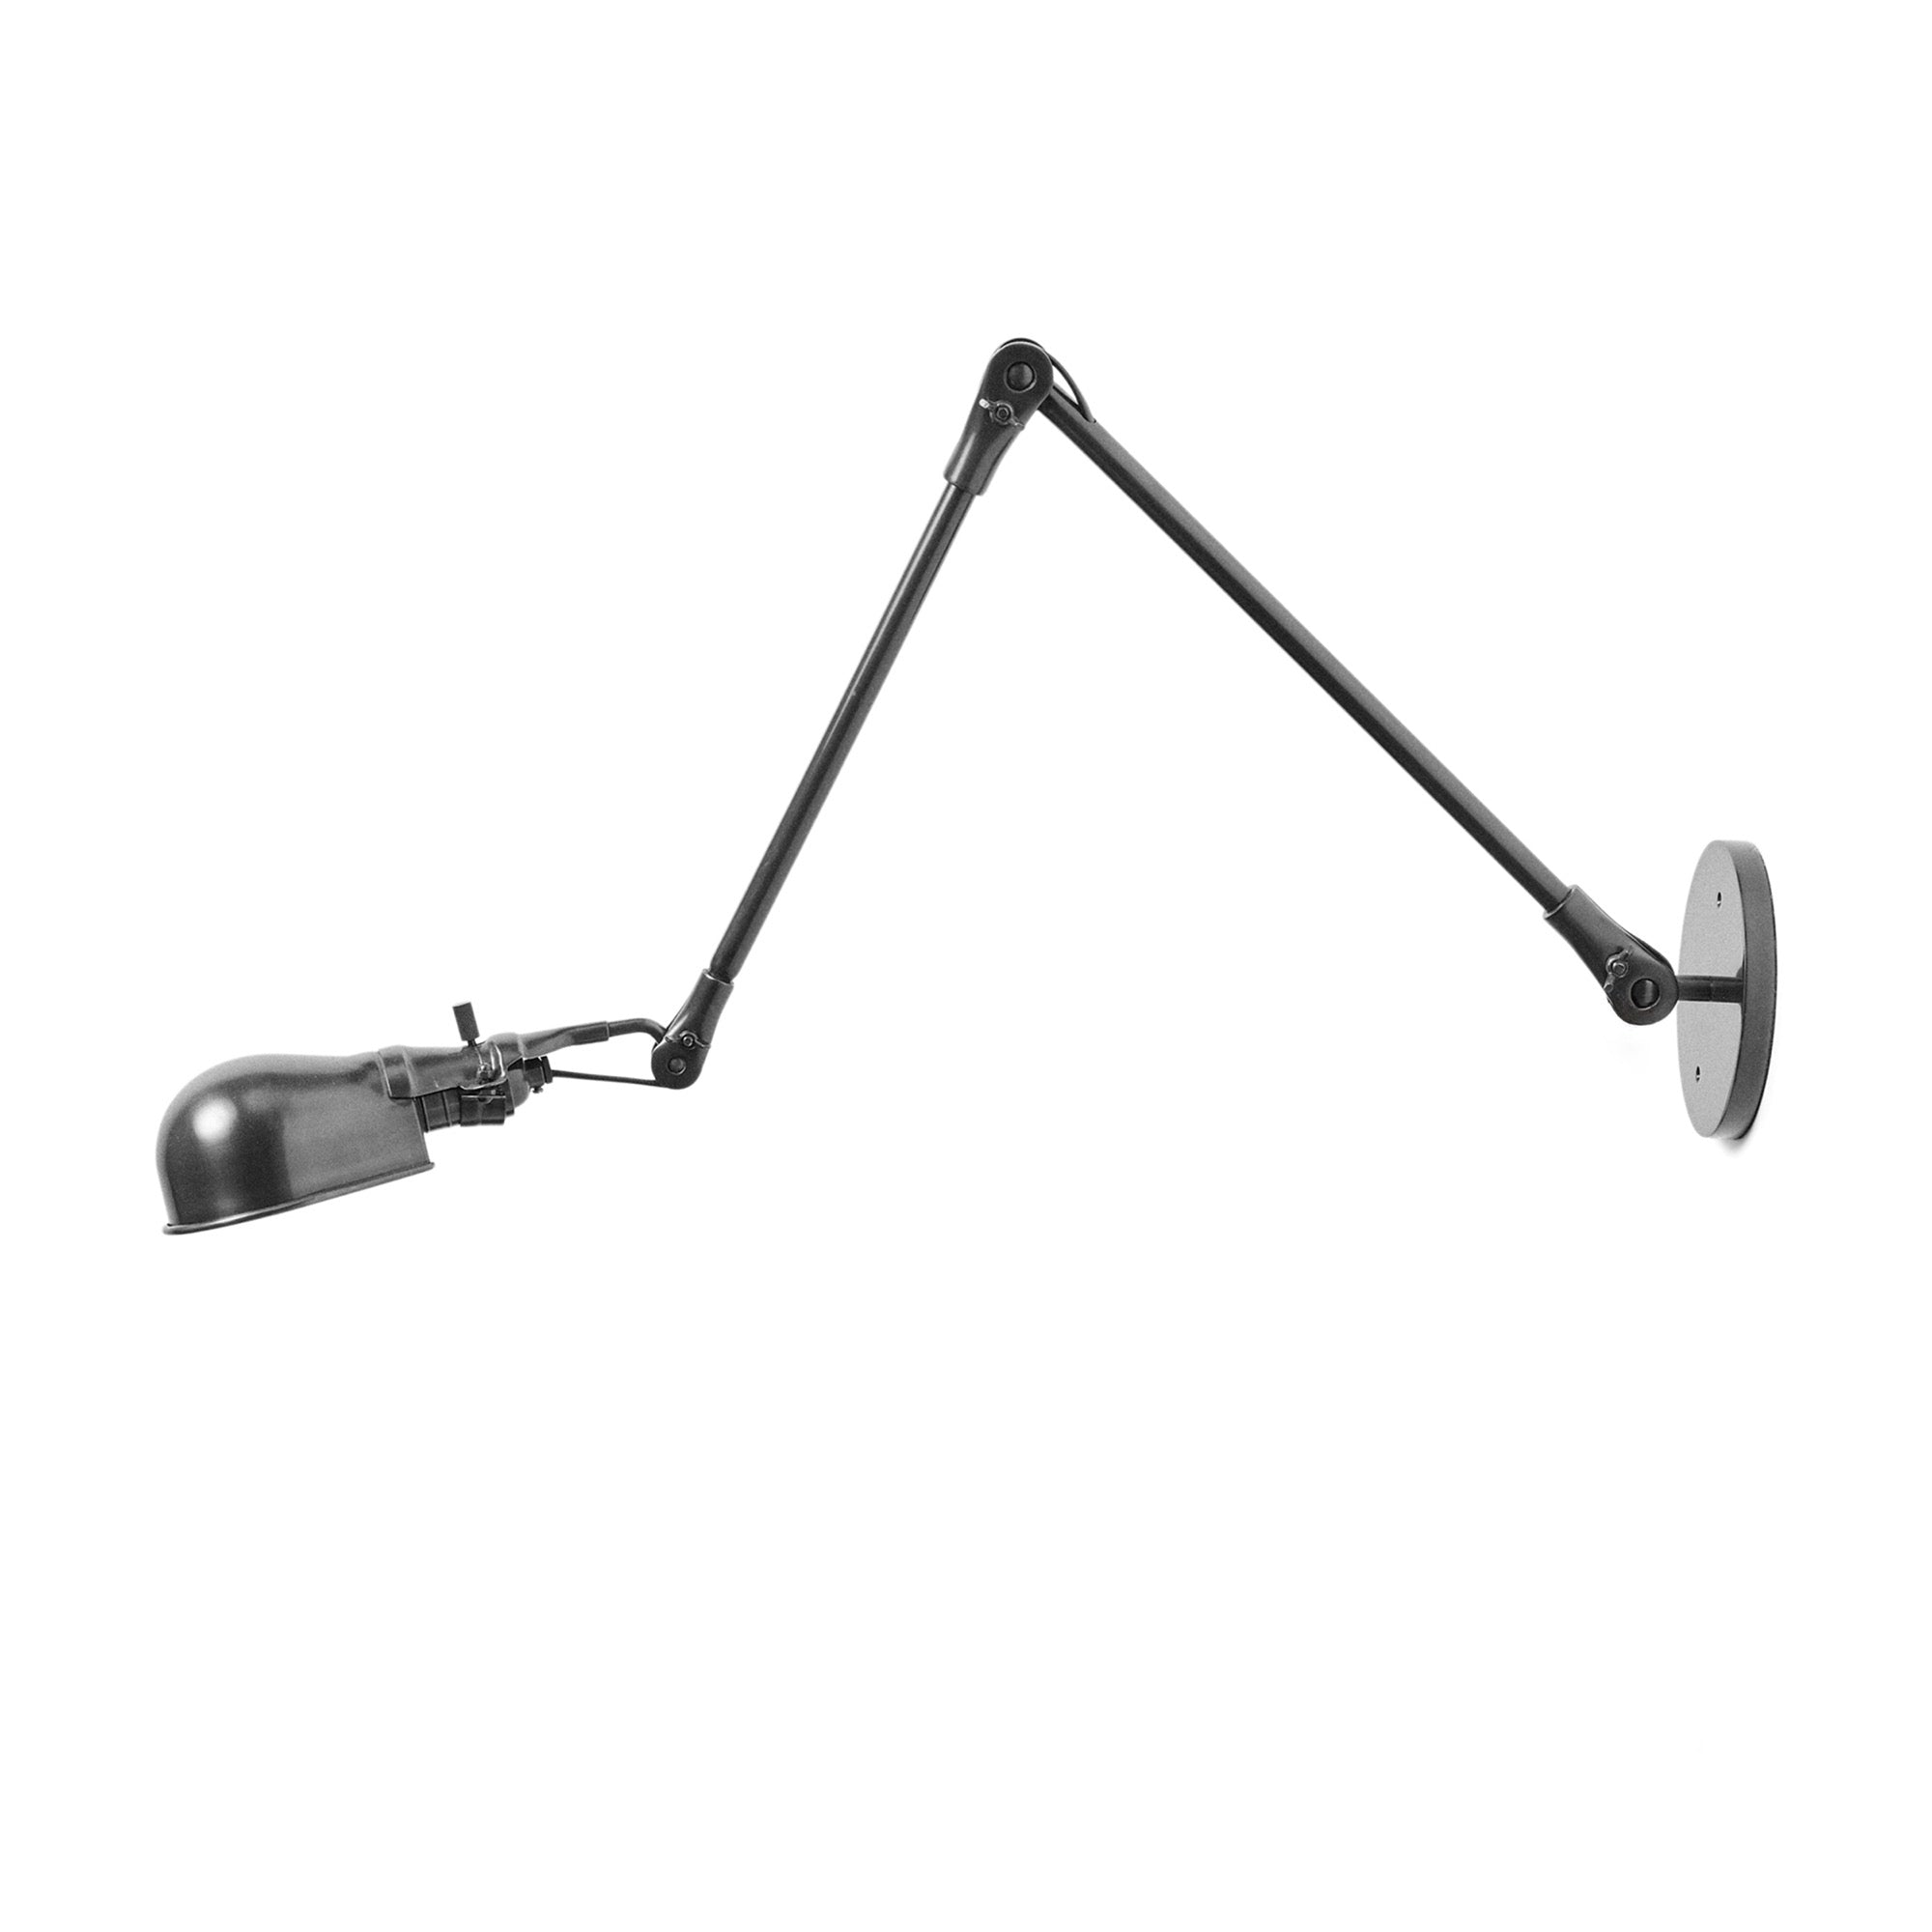 Industrial Adjusting Lamps from USA